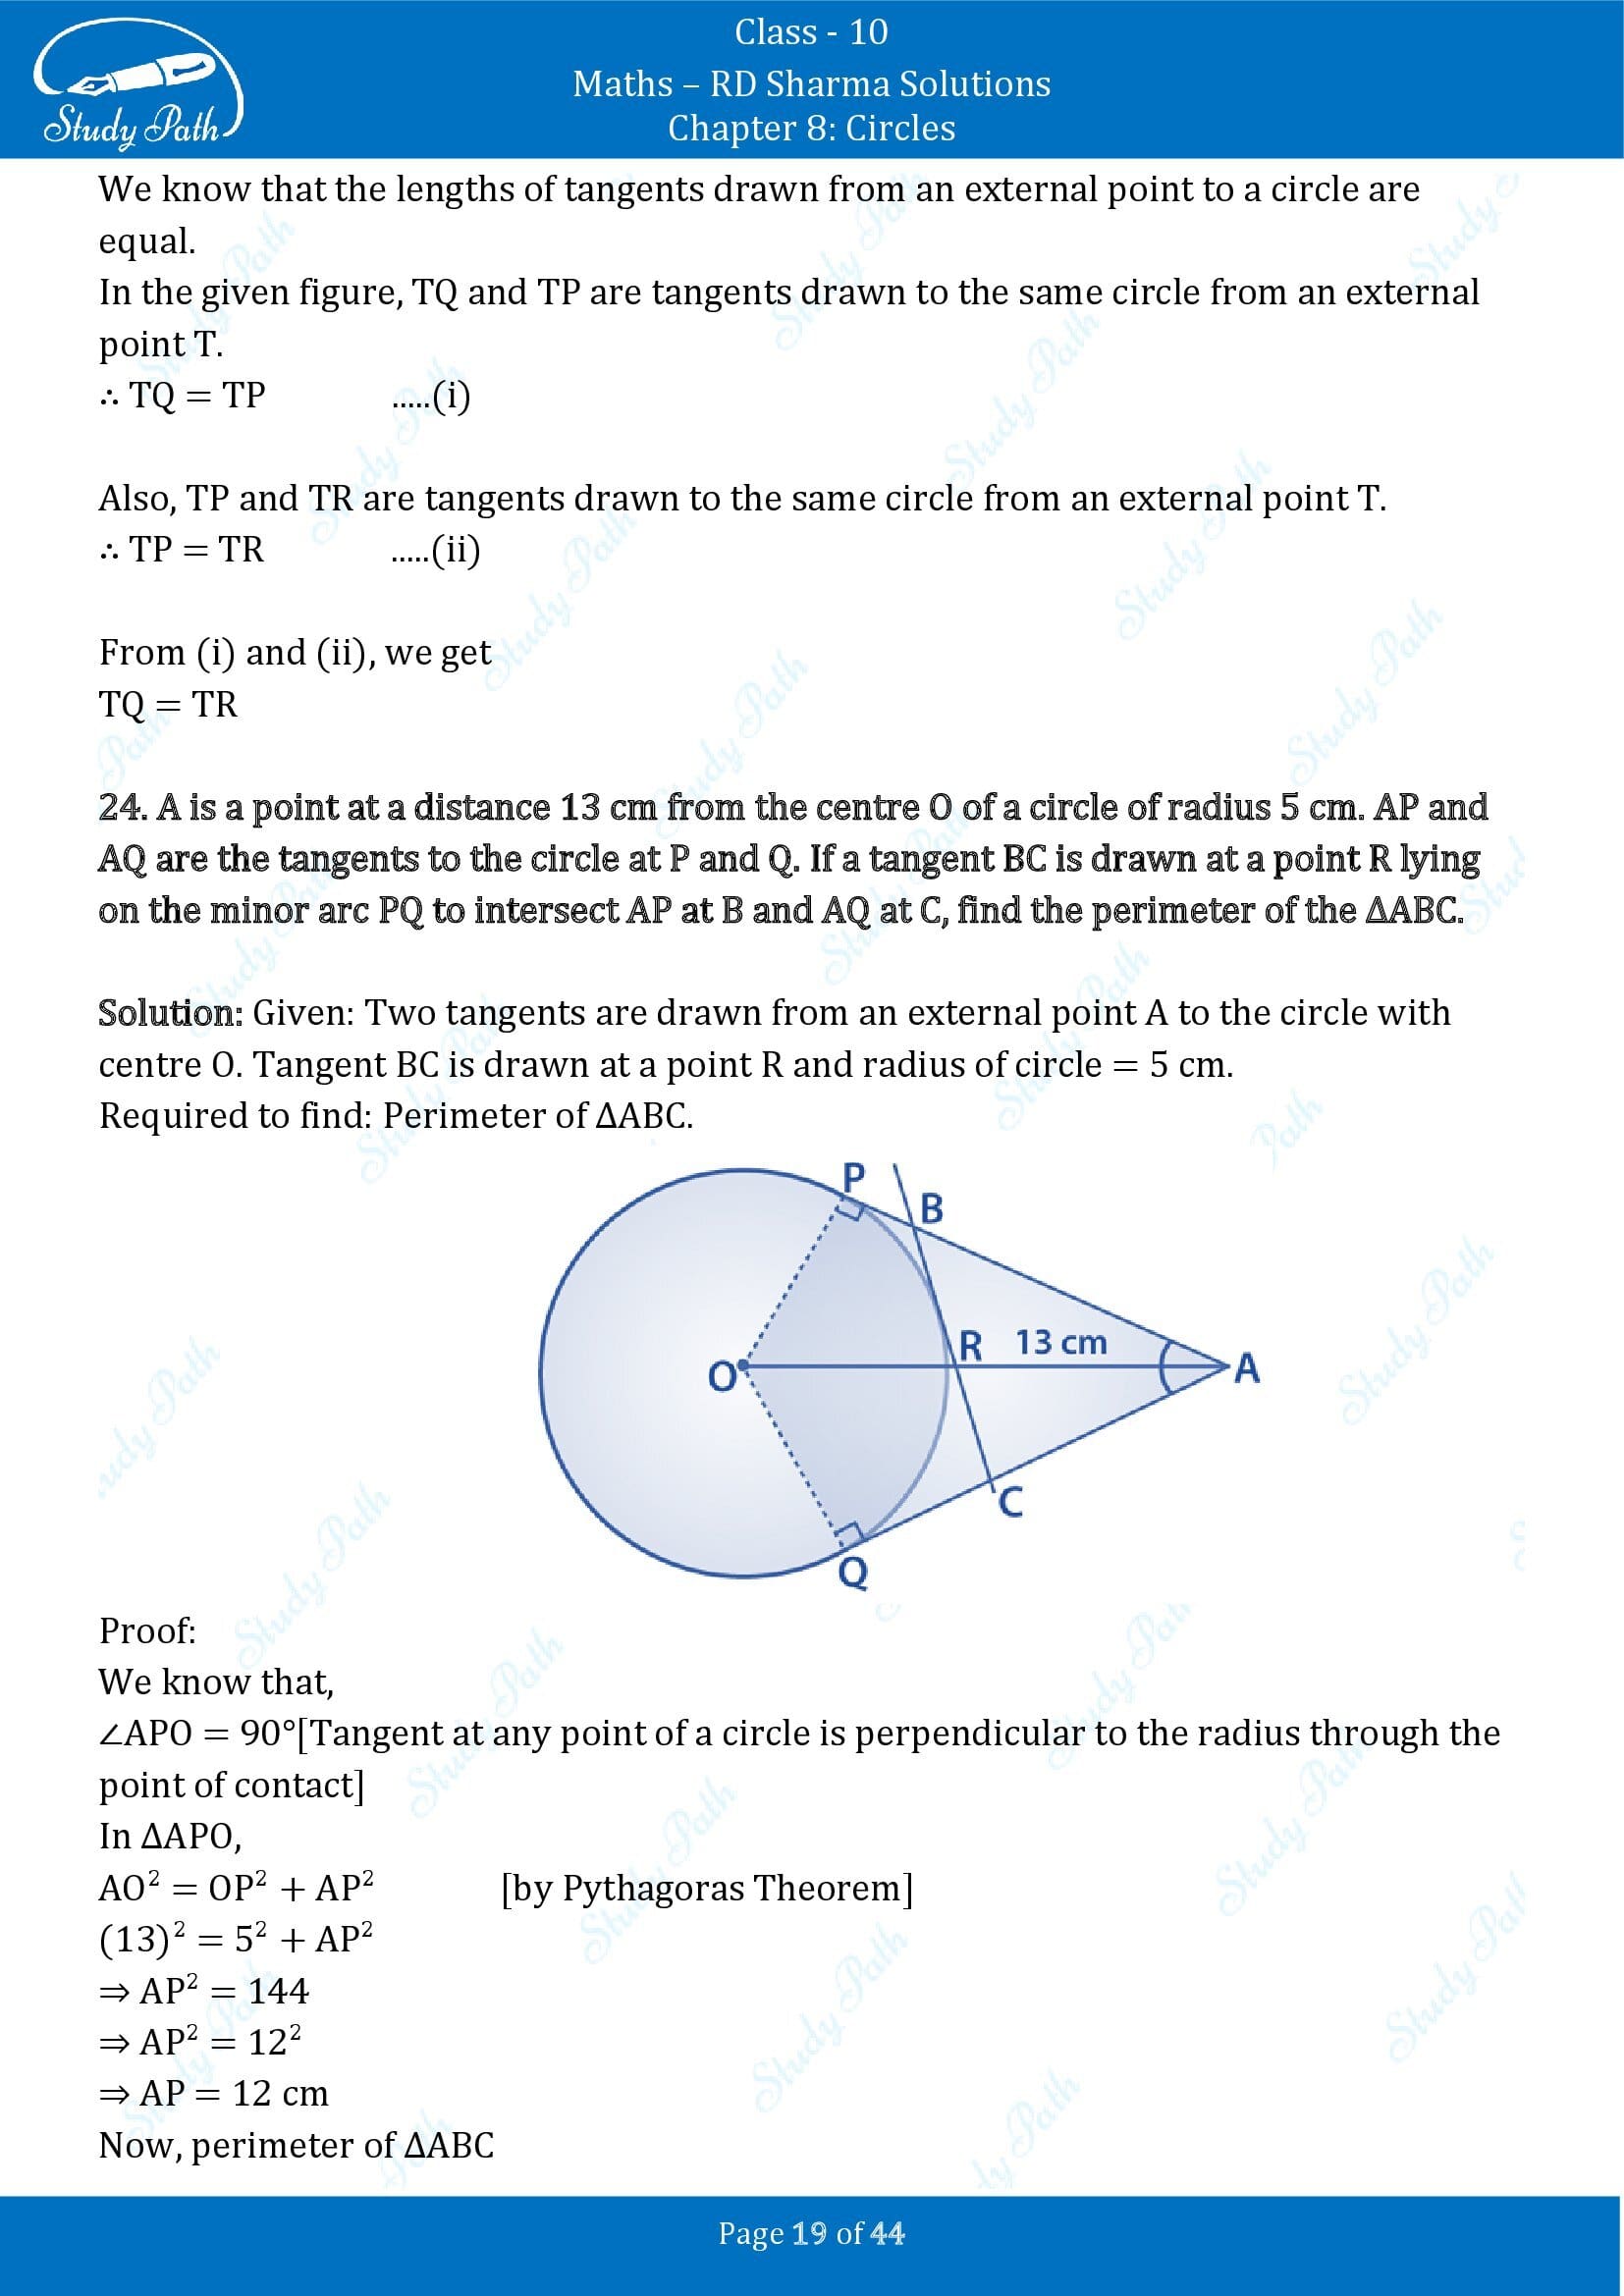 RD Sharma Solutions Class 10 Chapter 8 Circles Exercise 8.2 00019